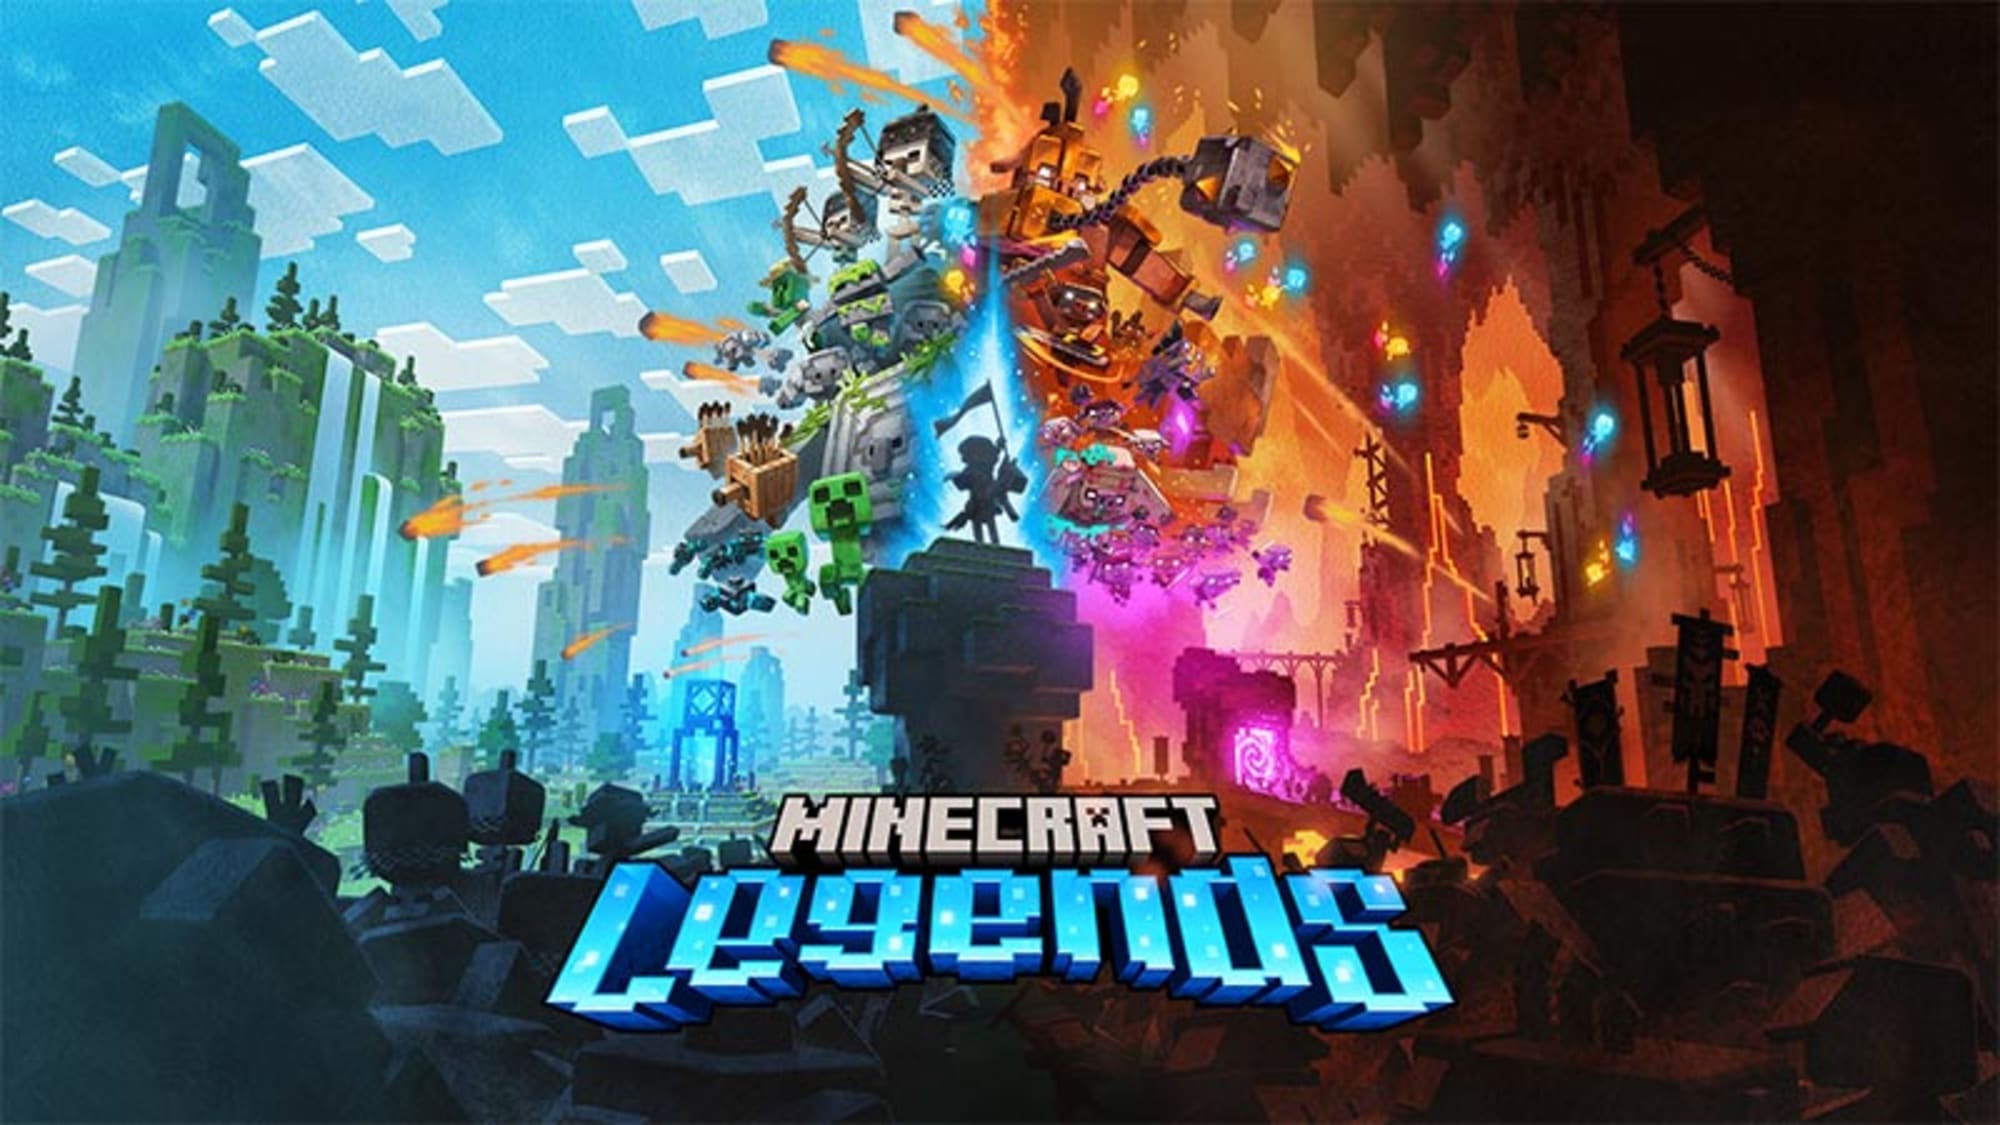 pust Fremtrædende Creek Is Minecraft Legends coming to Xbox Game Pass?